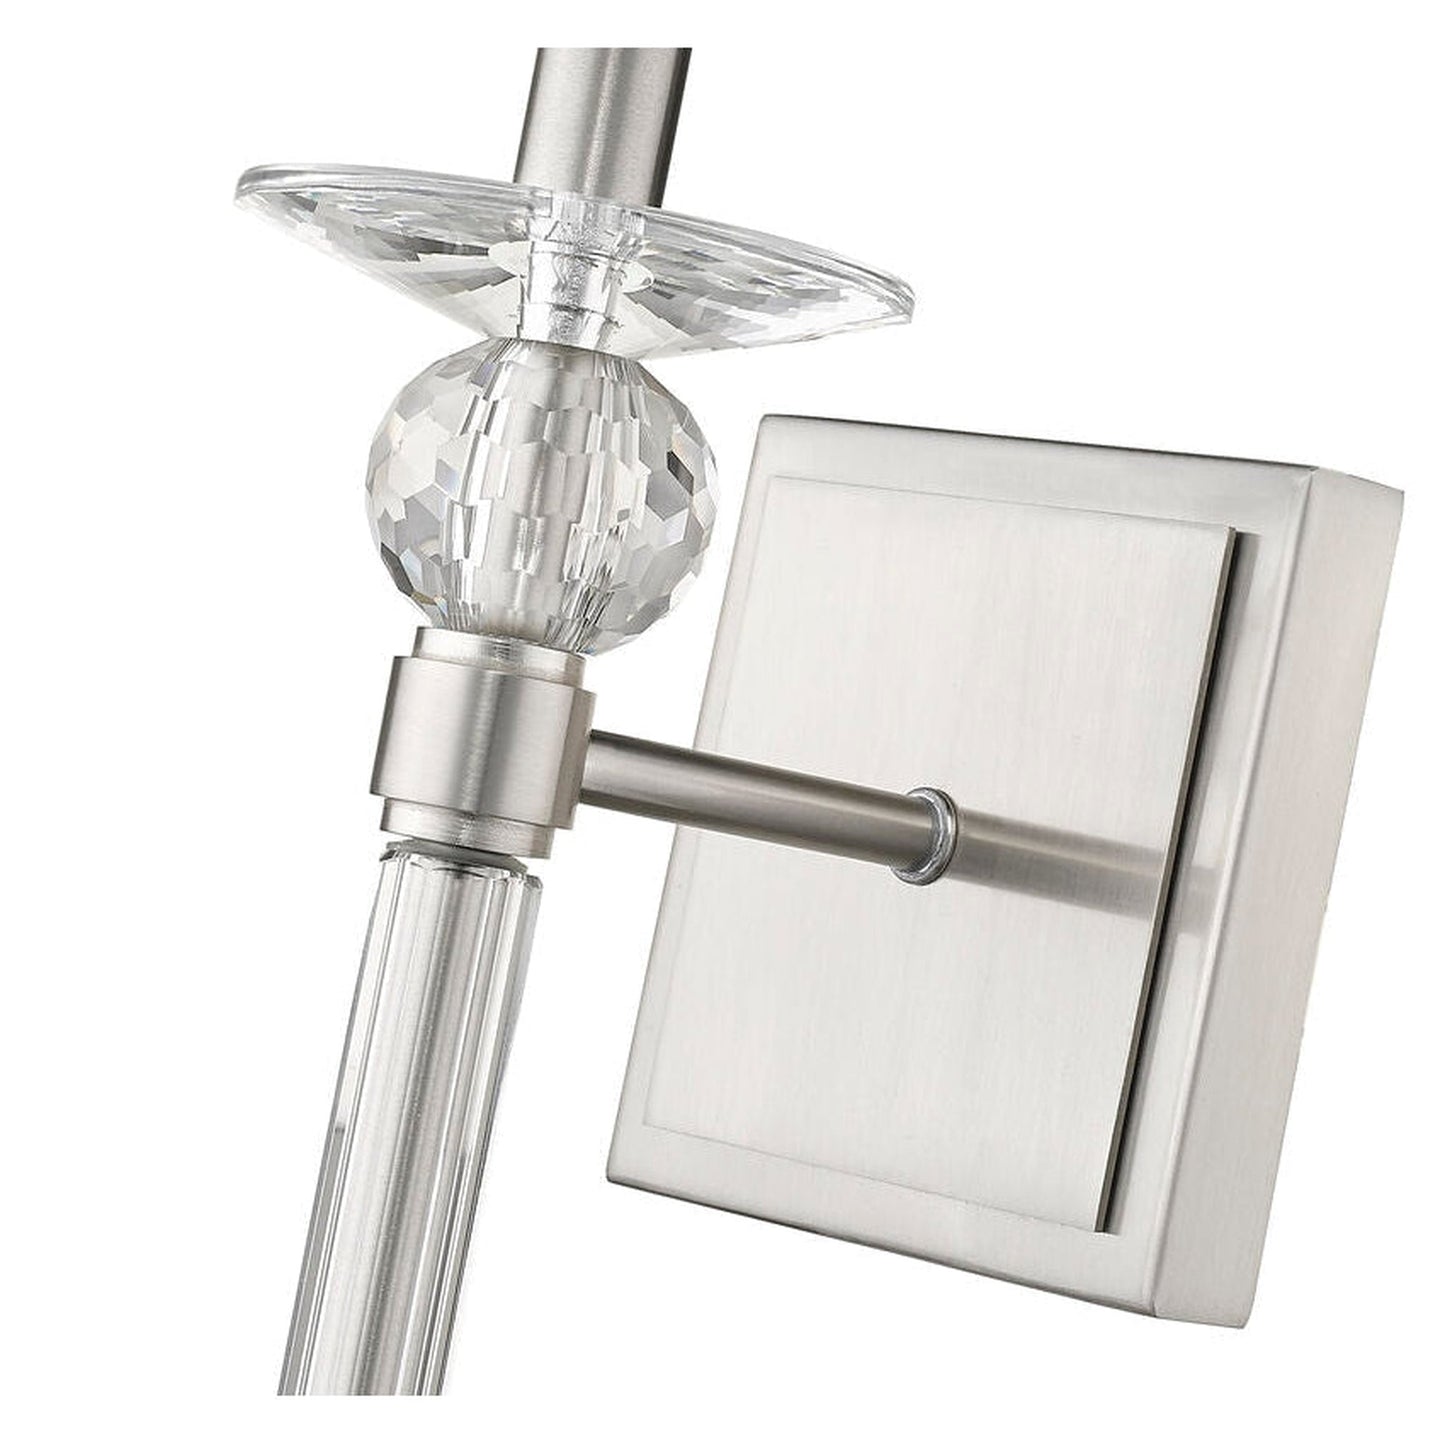 Z-Lite Ava 6" 1-Light Brushed Nickel Wall Sconce With White Fabric Shade